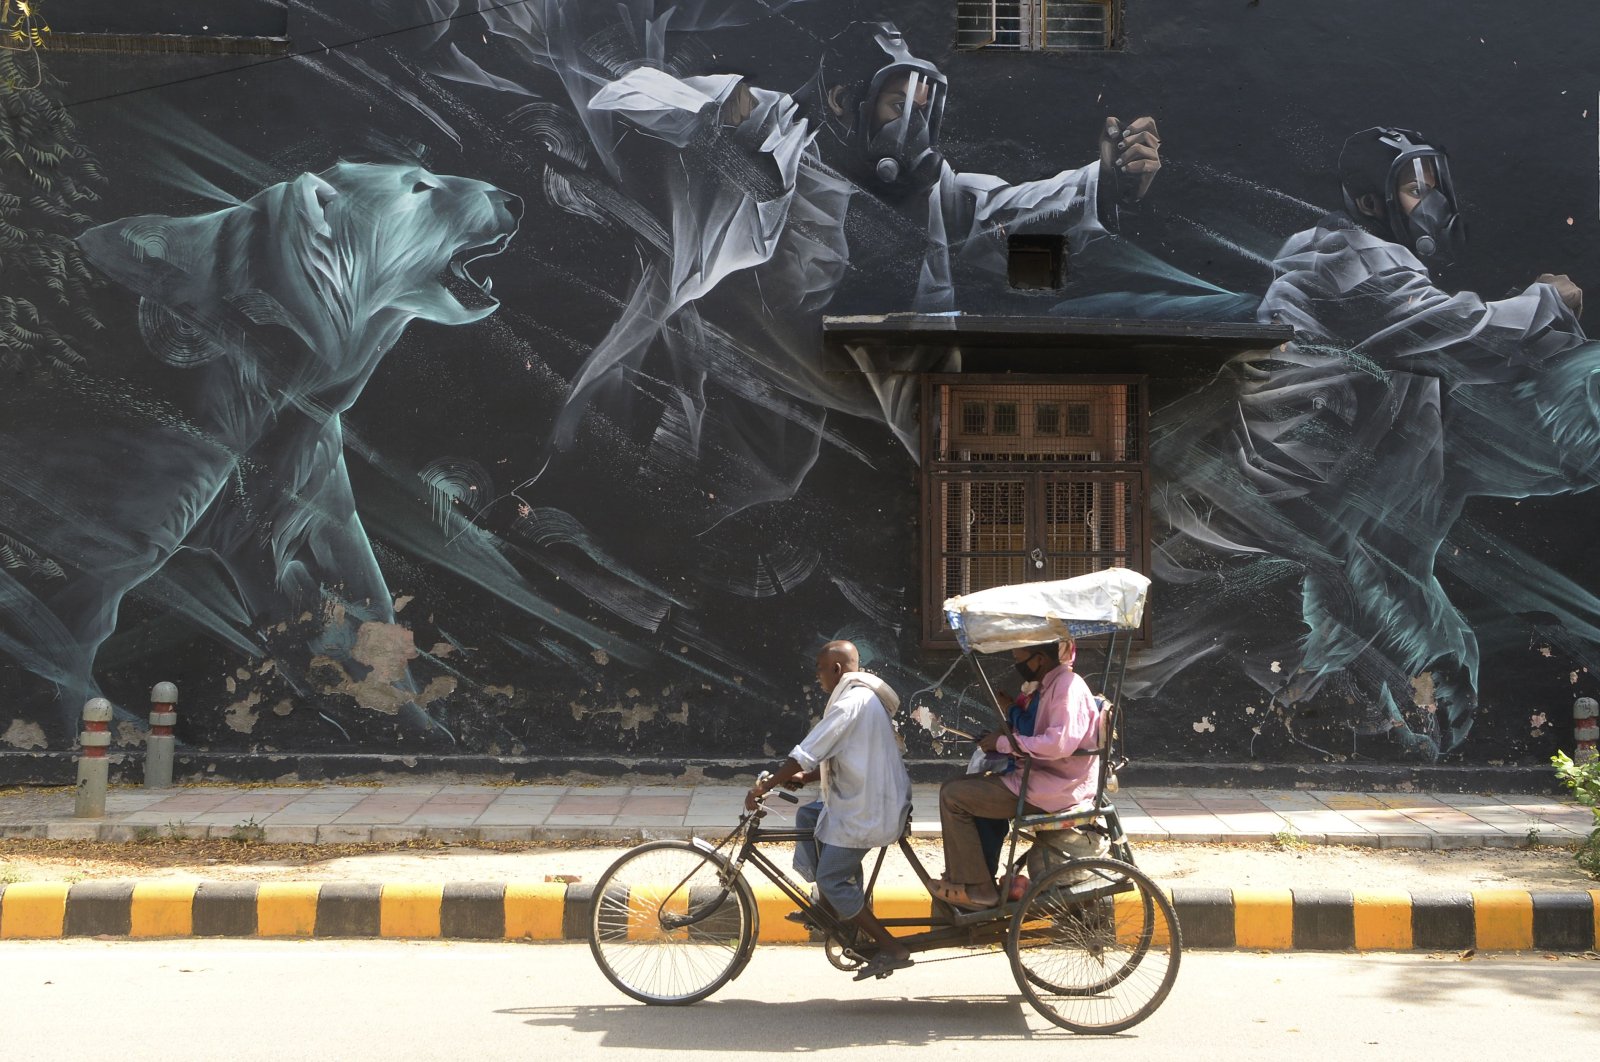 A rickshaw driver carries passengers wearing facemasks past a mural at Lodhi Art District during a government-imposed nationwide lockdown as a preventive measure against the COVID-19 coronavirus, in New Delhi on April 13, 2020. (Photo by SAJJAD HUSSAIN / AFP)